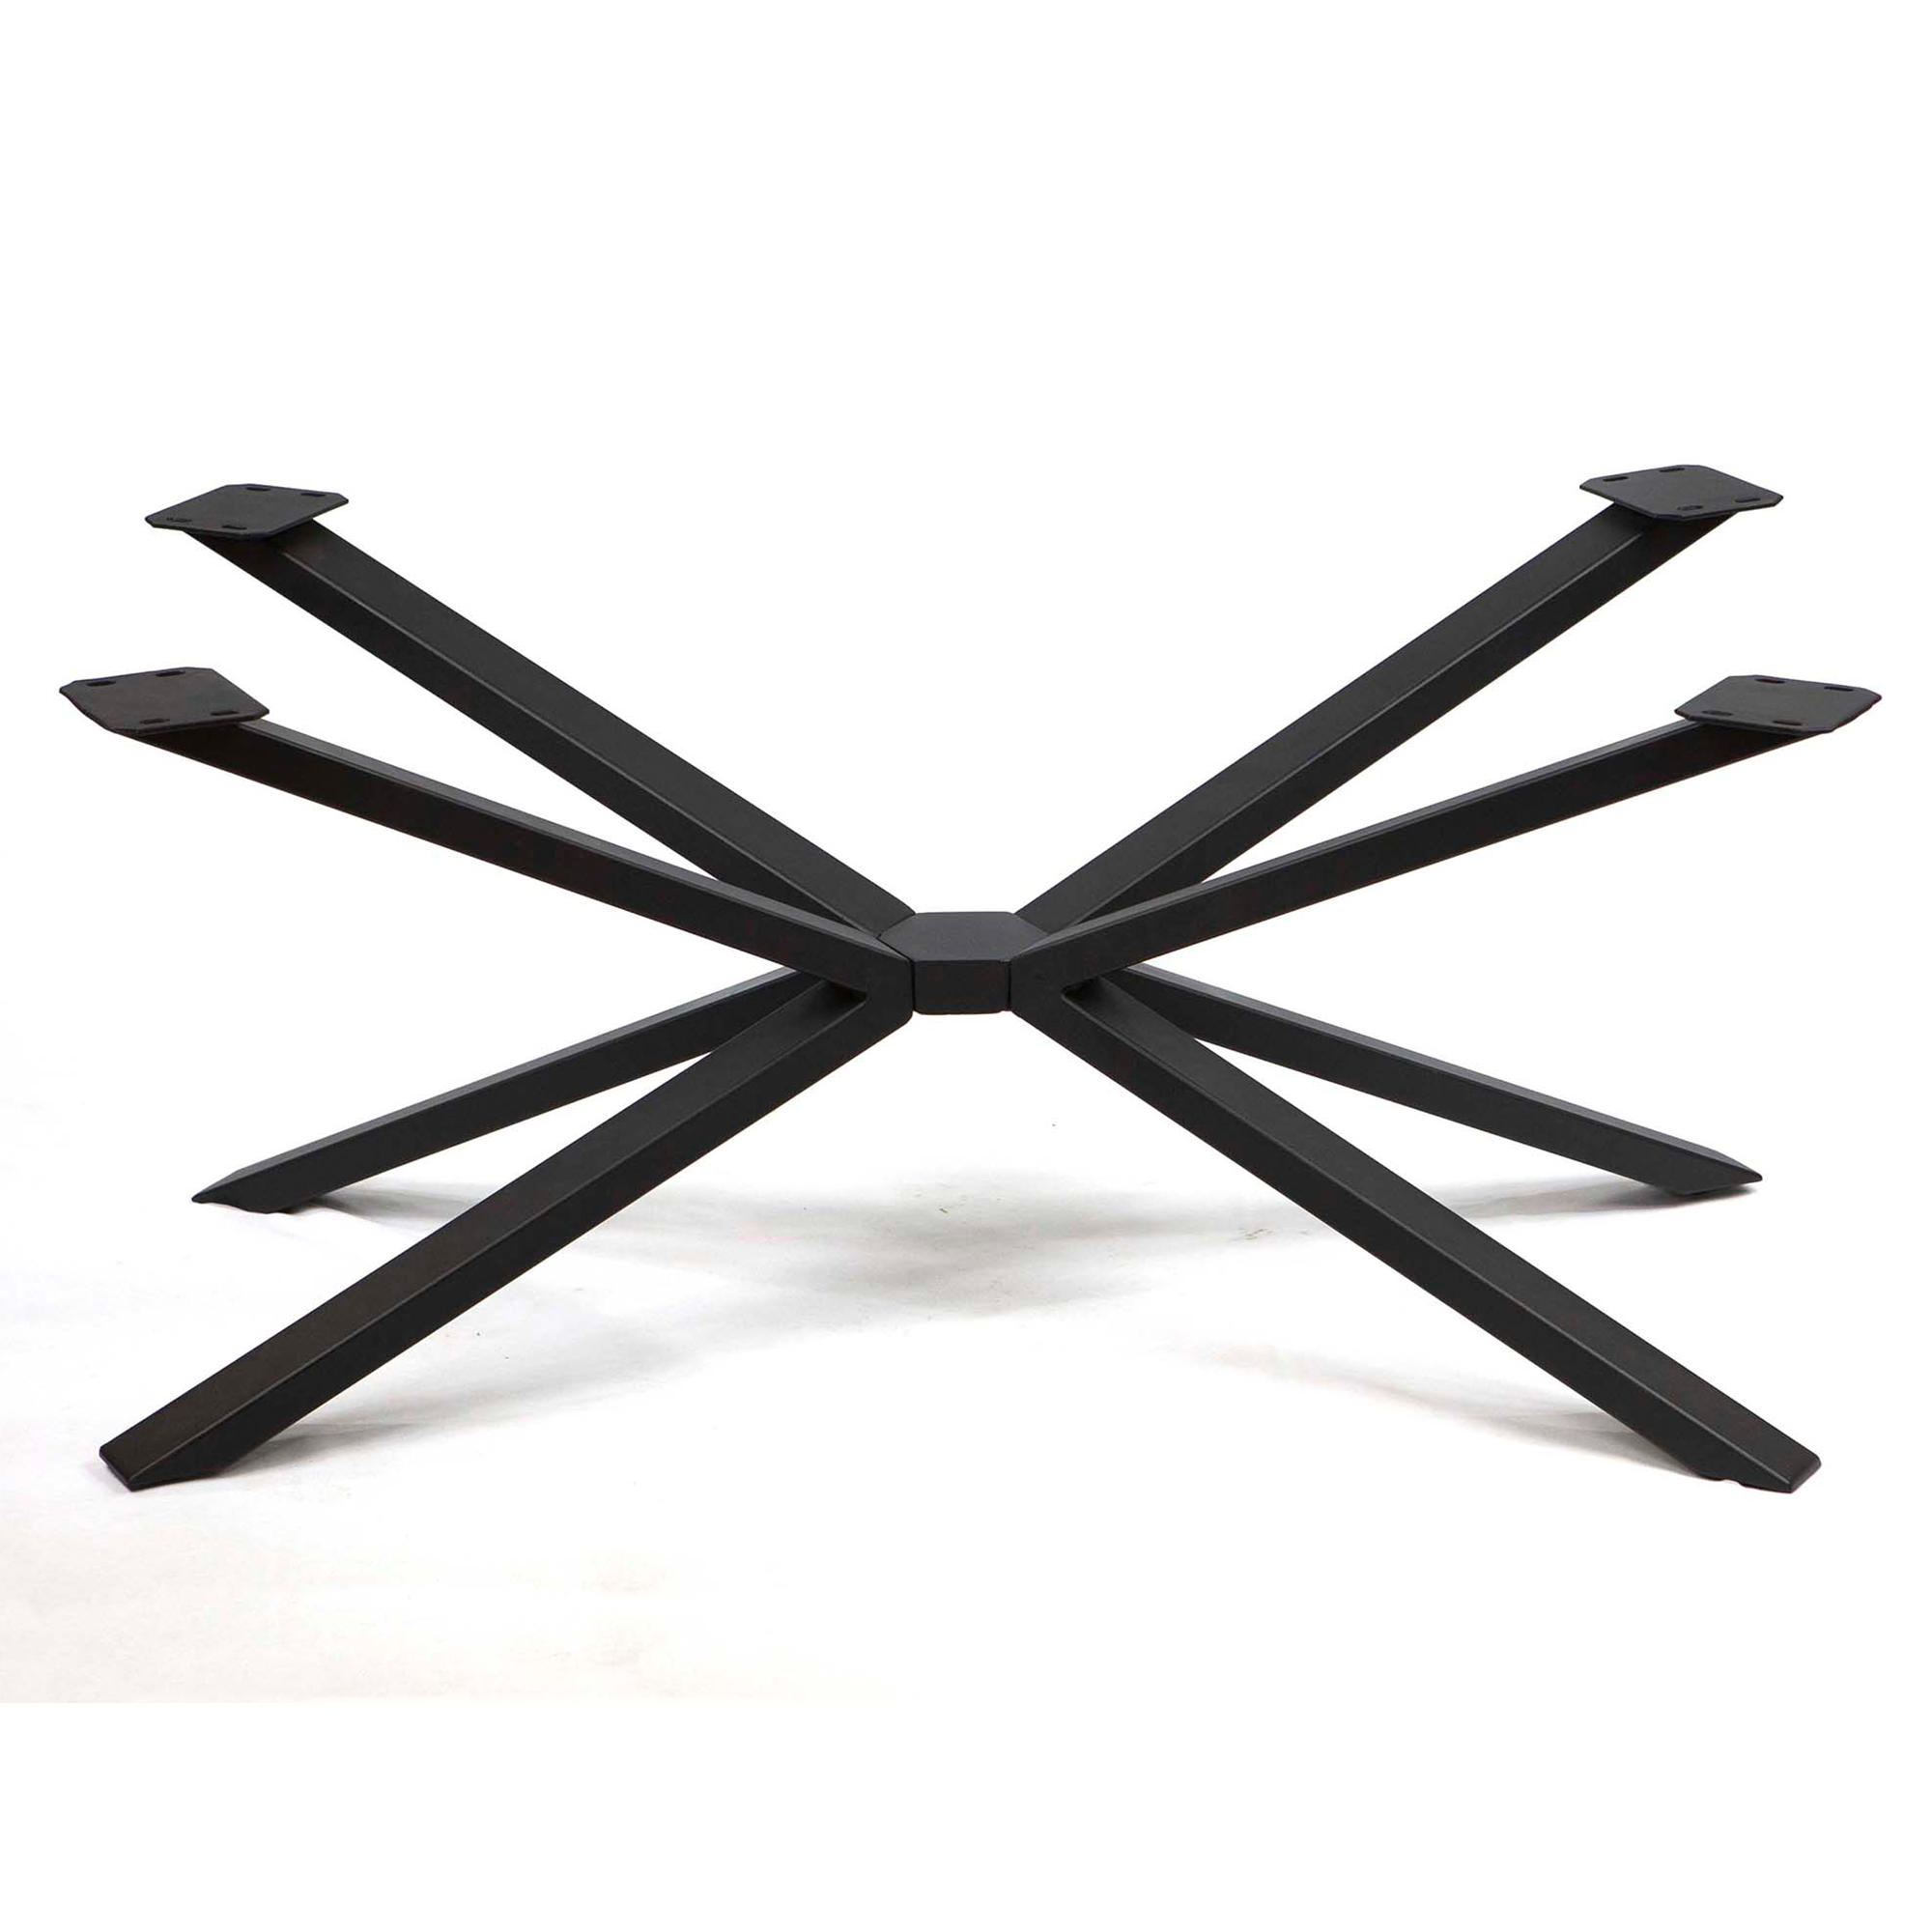 SS1520 Coffee Table Legs, 1 Set, Butterfly-Shaped